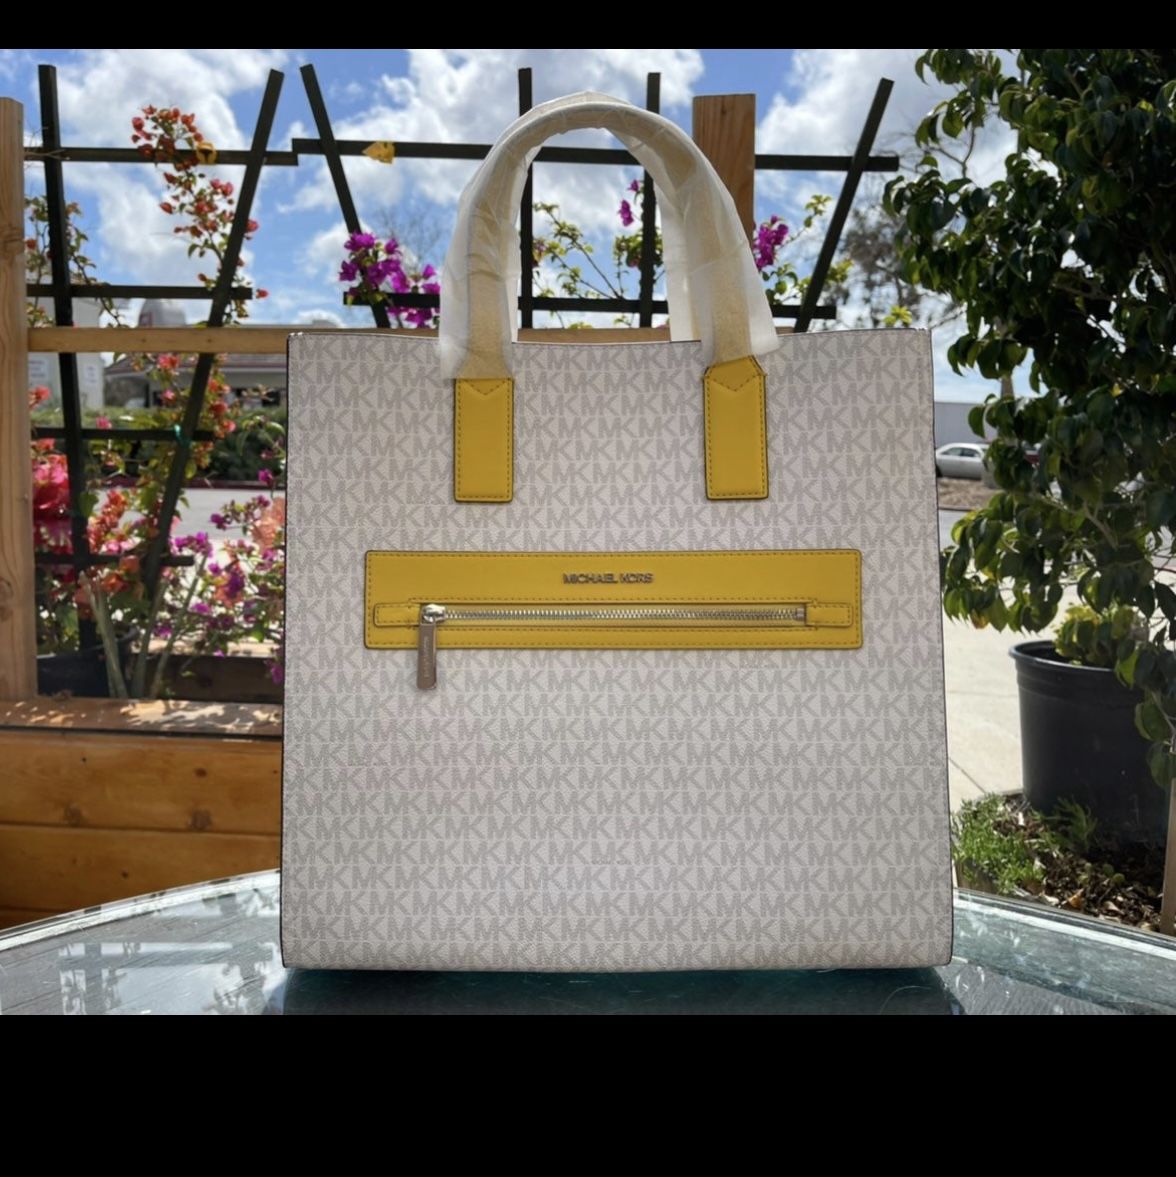 Michael Kors Large Kenly Tote for Sale in Mansfield, TX - OfferUp